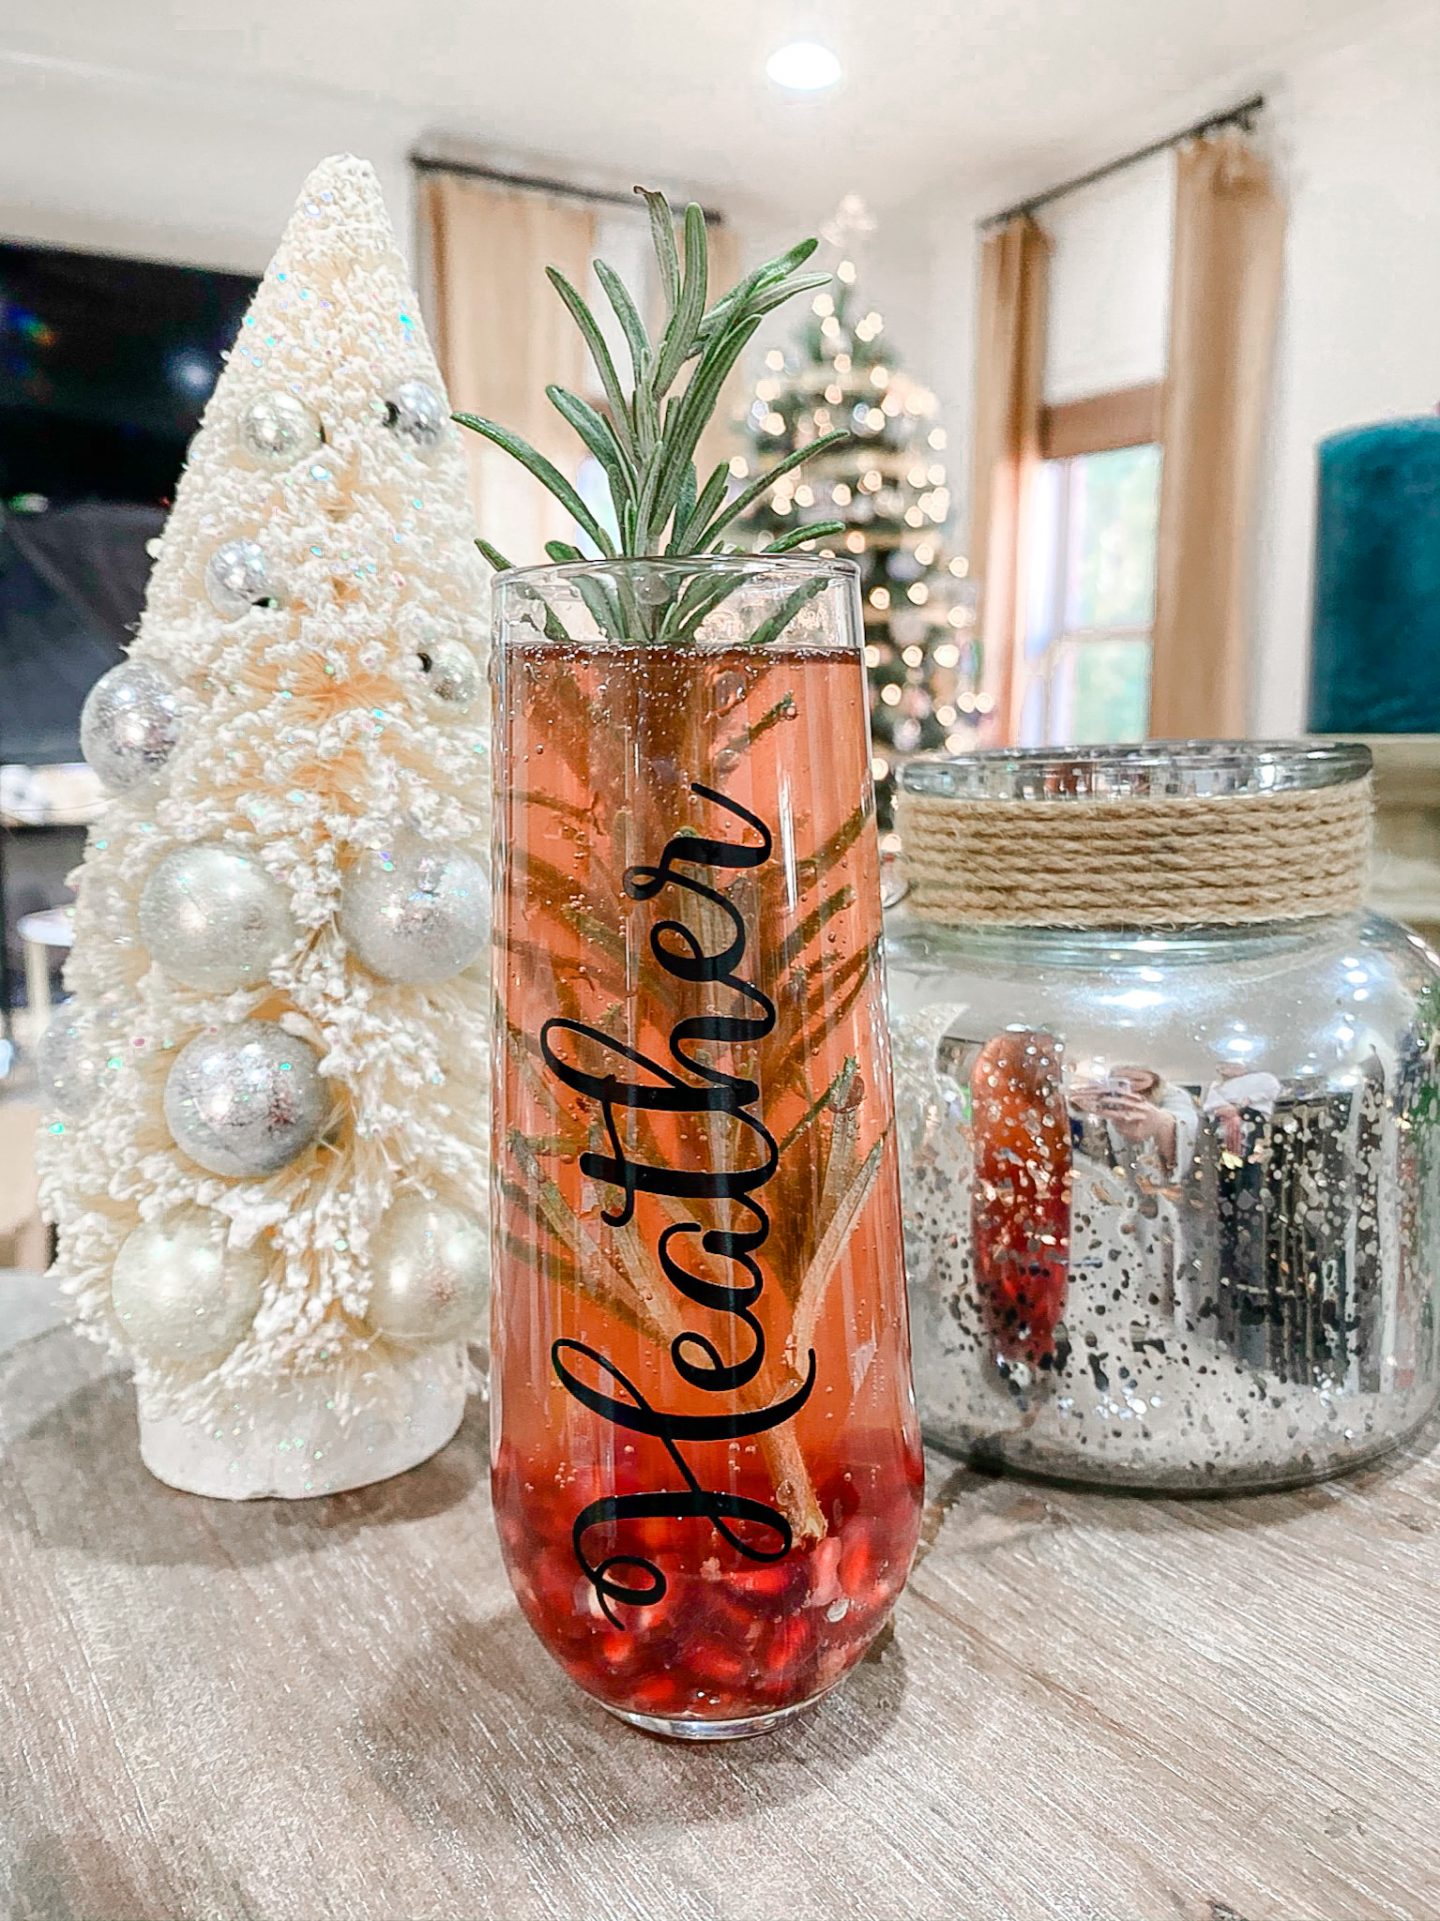 8 Easy Holiday Cocktails To Try This Year by Alabama Life + Style blogger, Heather Brown // My Life Well Loved